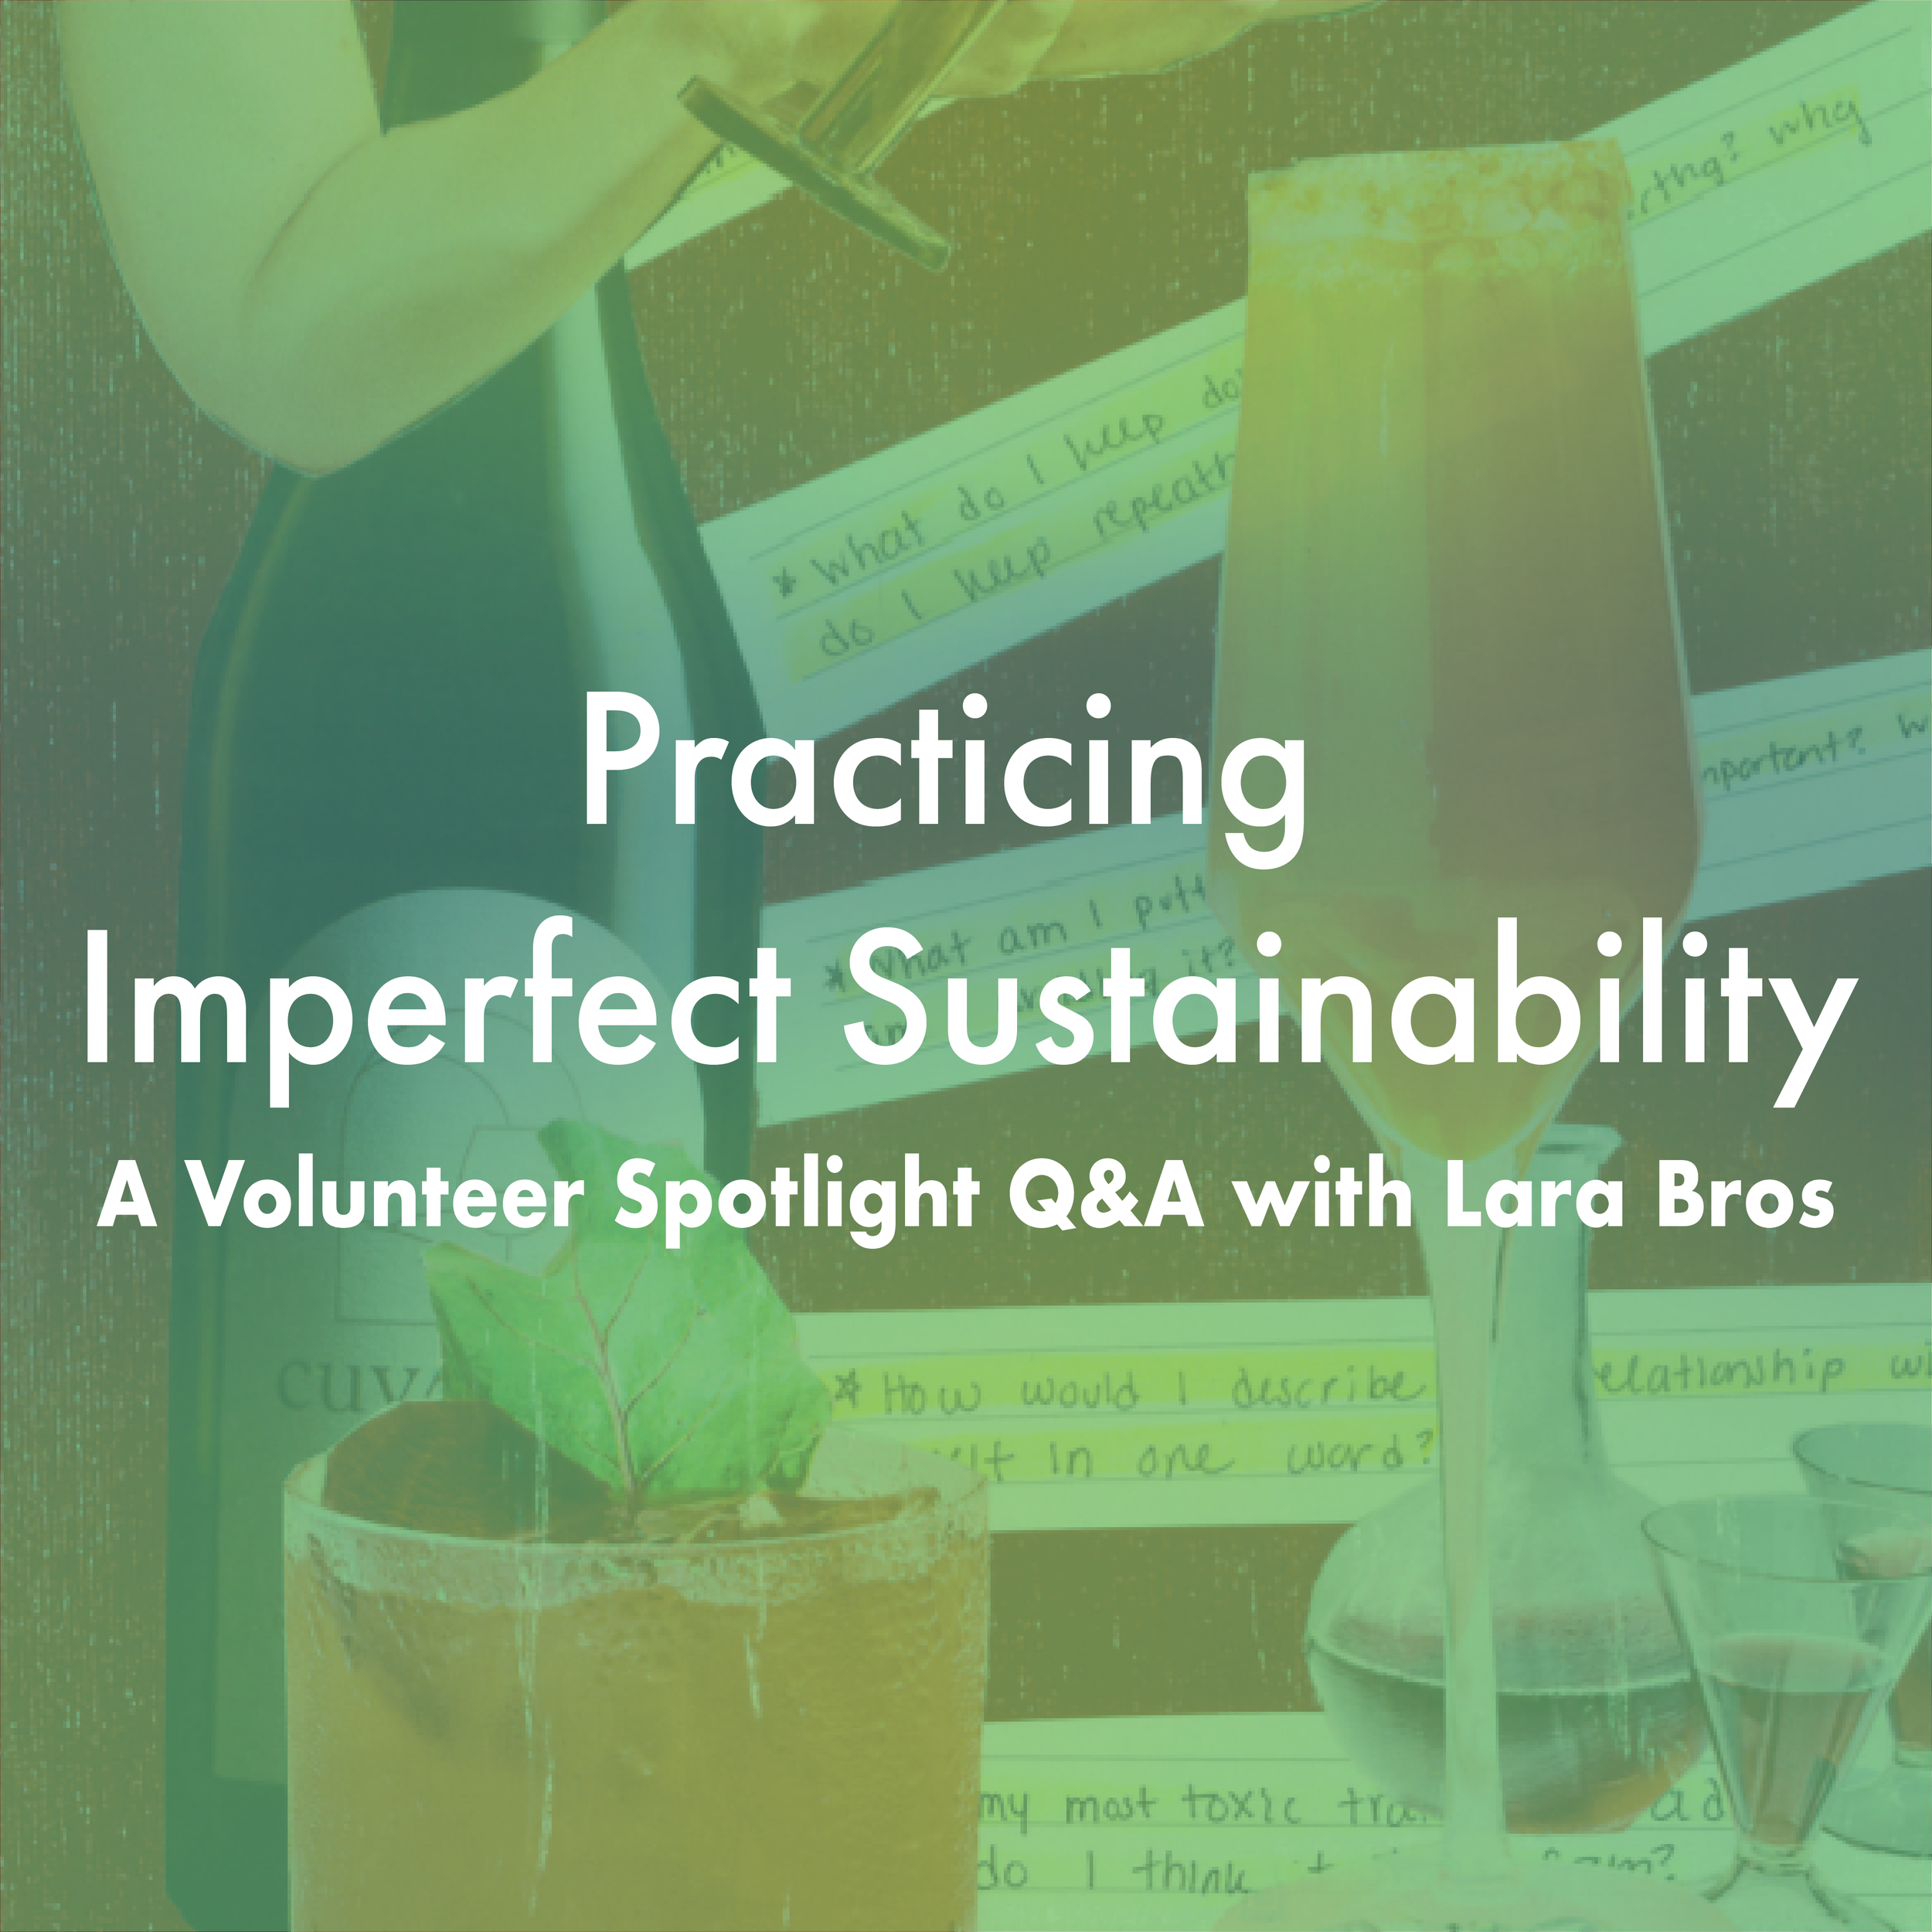 Practicing Imperfect Sustainability